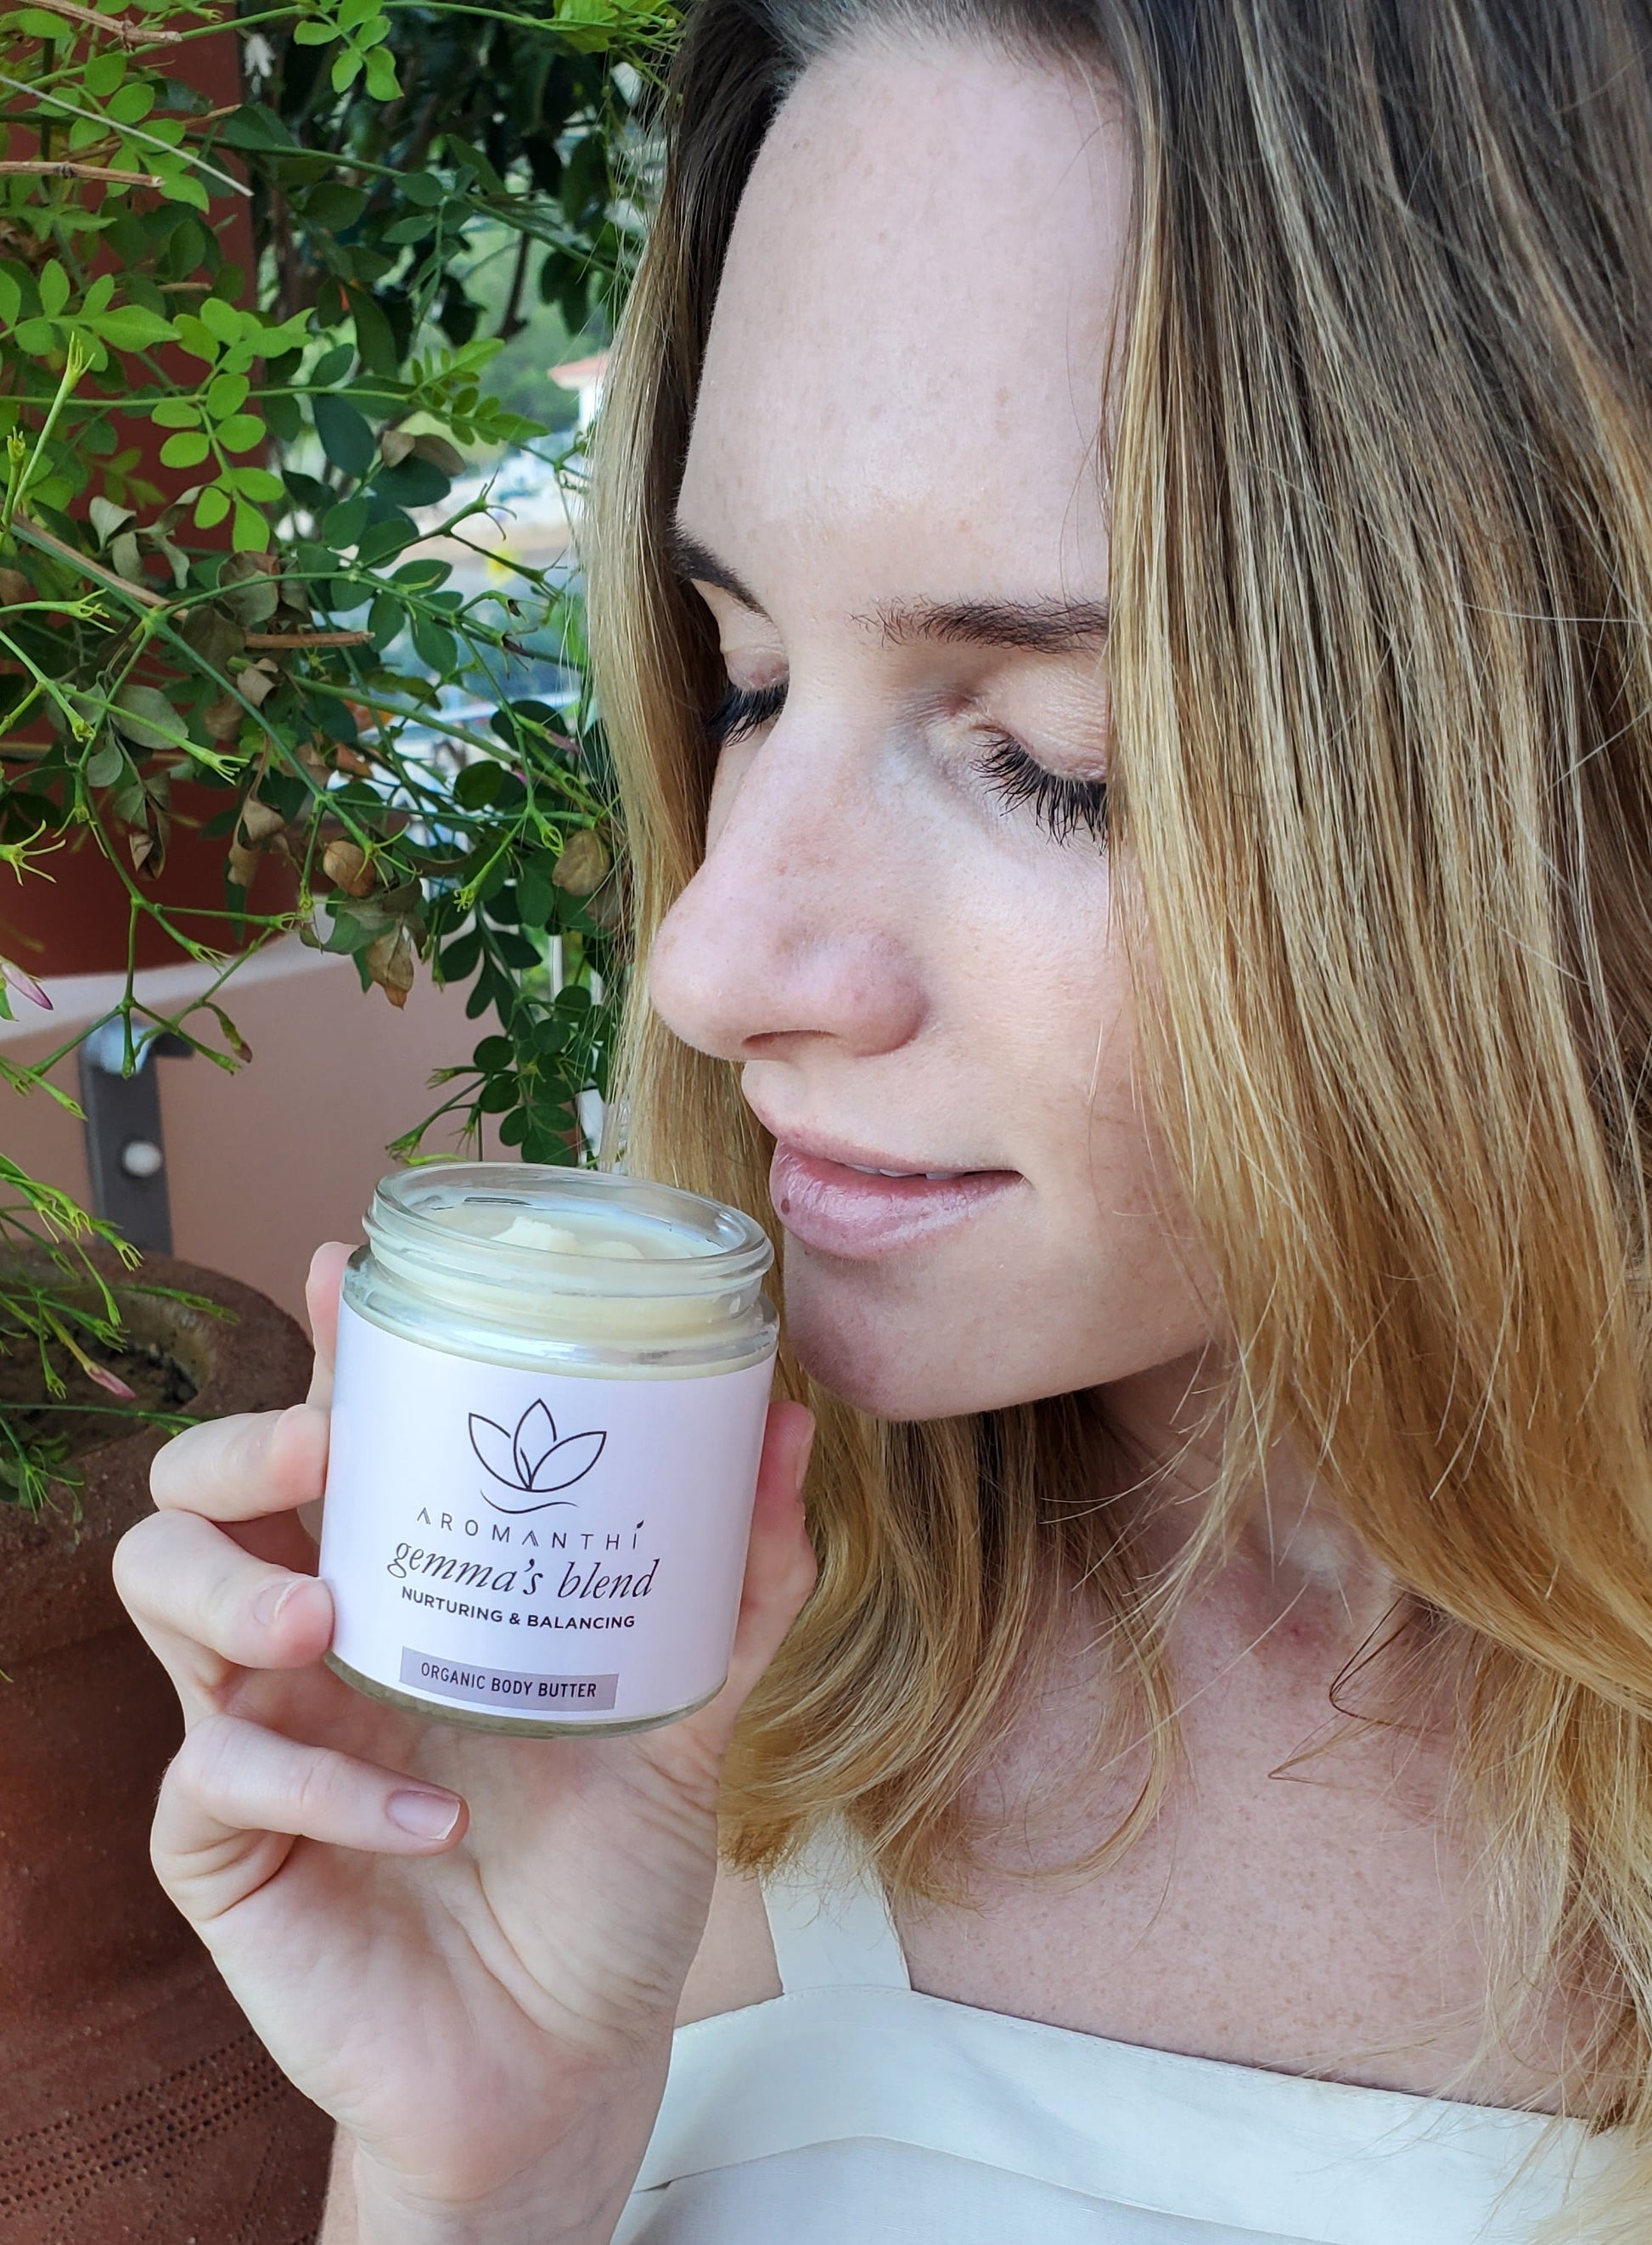 A woman smelling a jar of Gemma's blend body butter by Aromanthi